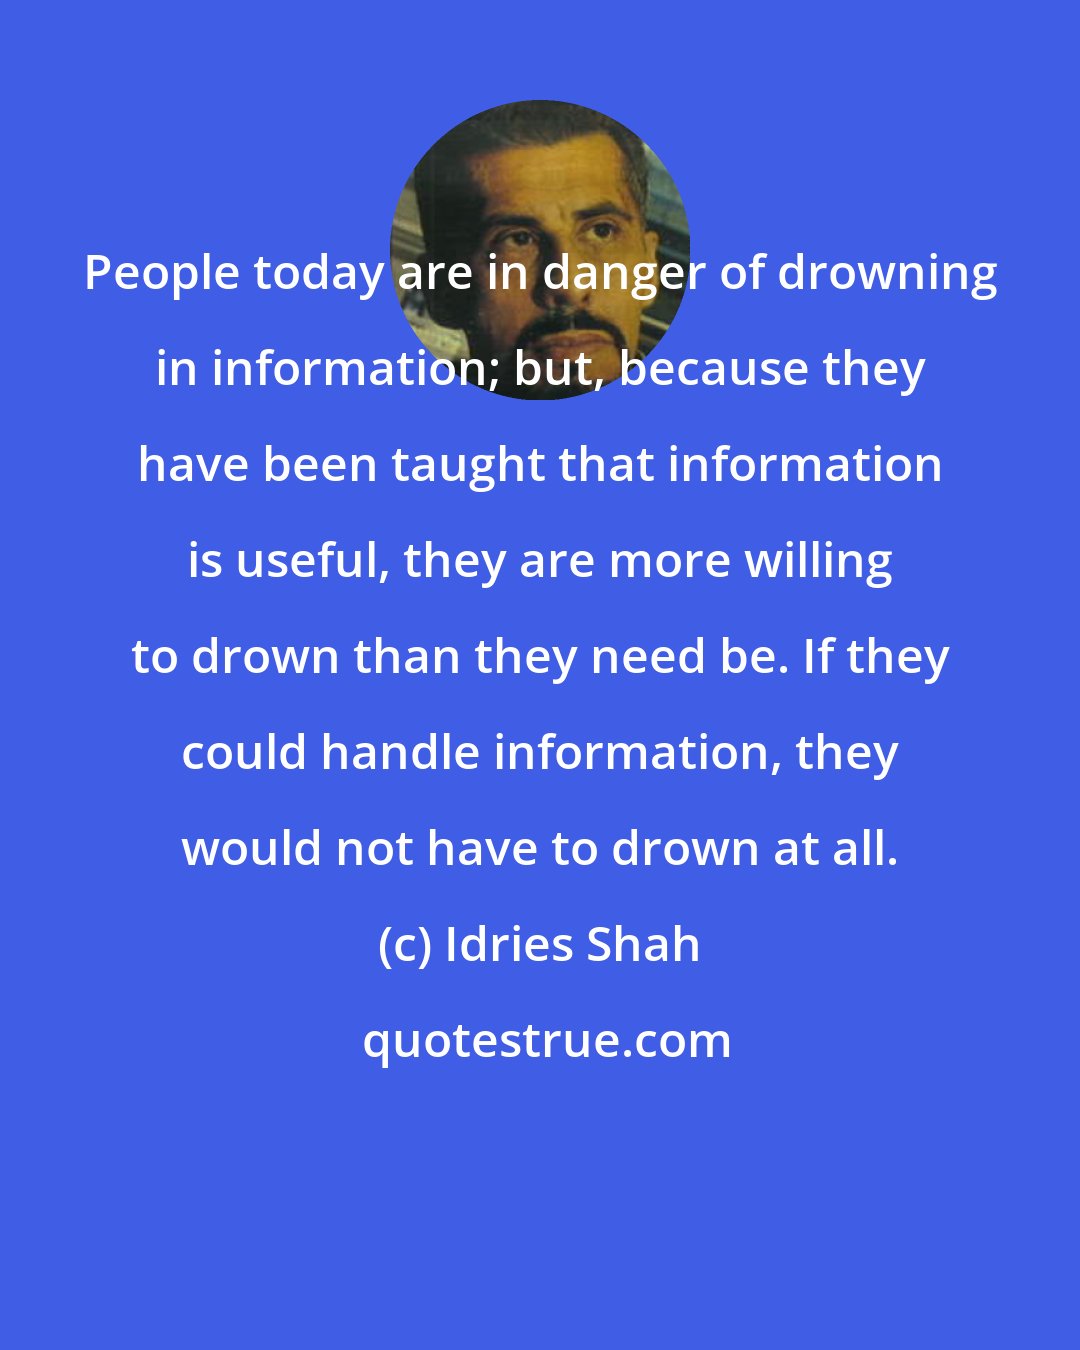 Idries Shah: People today are in danger of drowning in information; but, because they have been taught that information is useful, they are more willing to drown than they need be. If they could handle information, they would not have to drown at all.